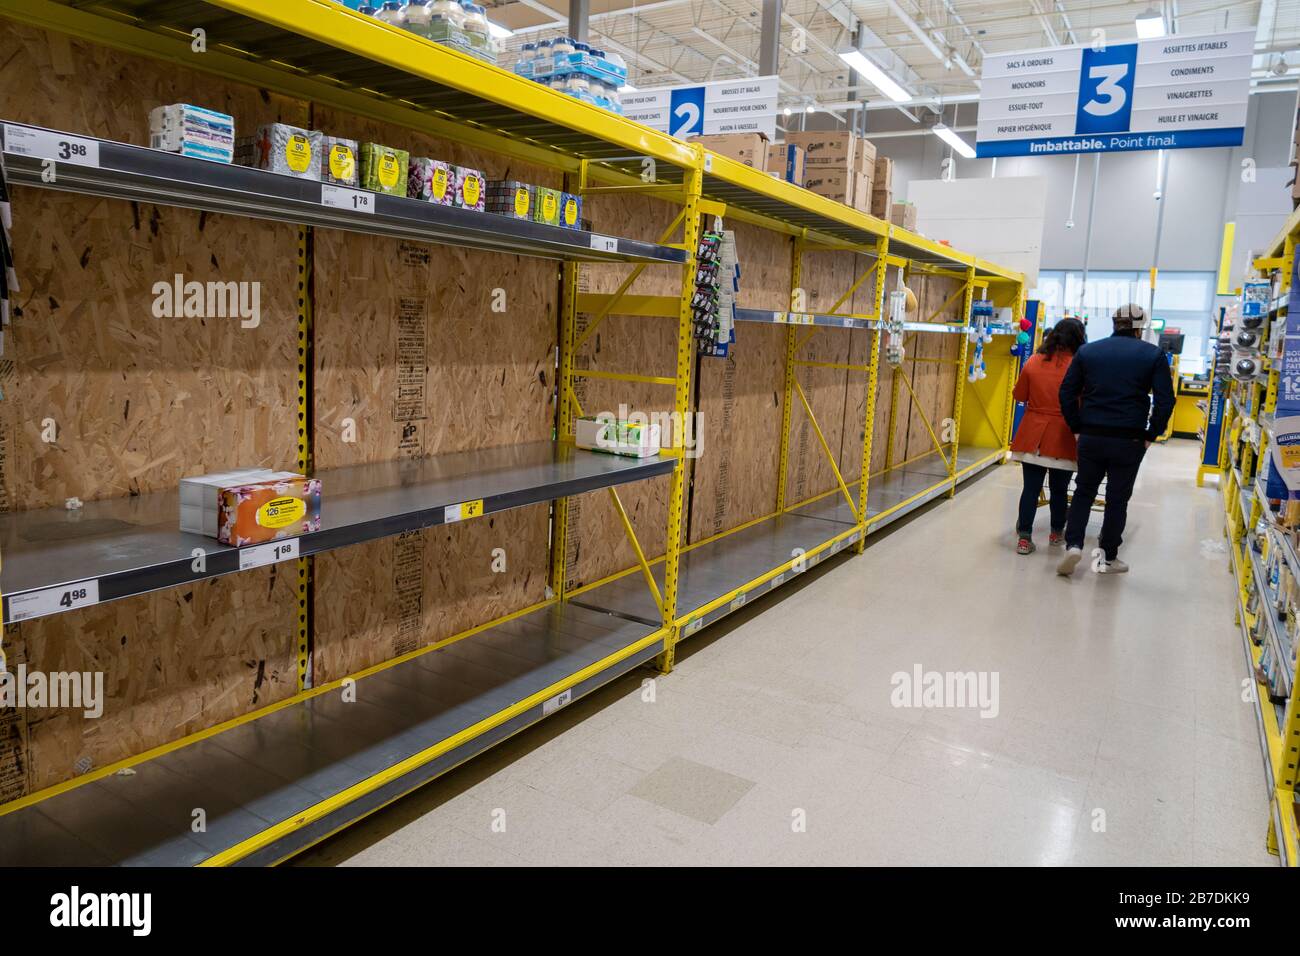 Montreal, CA - 15 March 2020: Empty shelves in a Maxi supermarket. Shortage of supplies due to panic of Coronavirus. Stock Photo